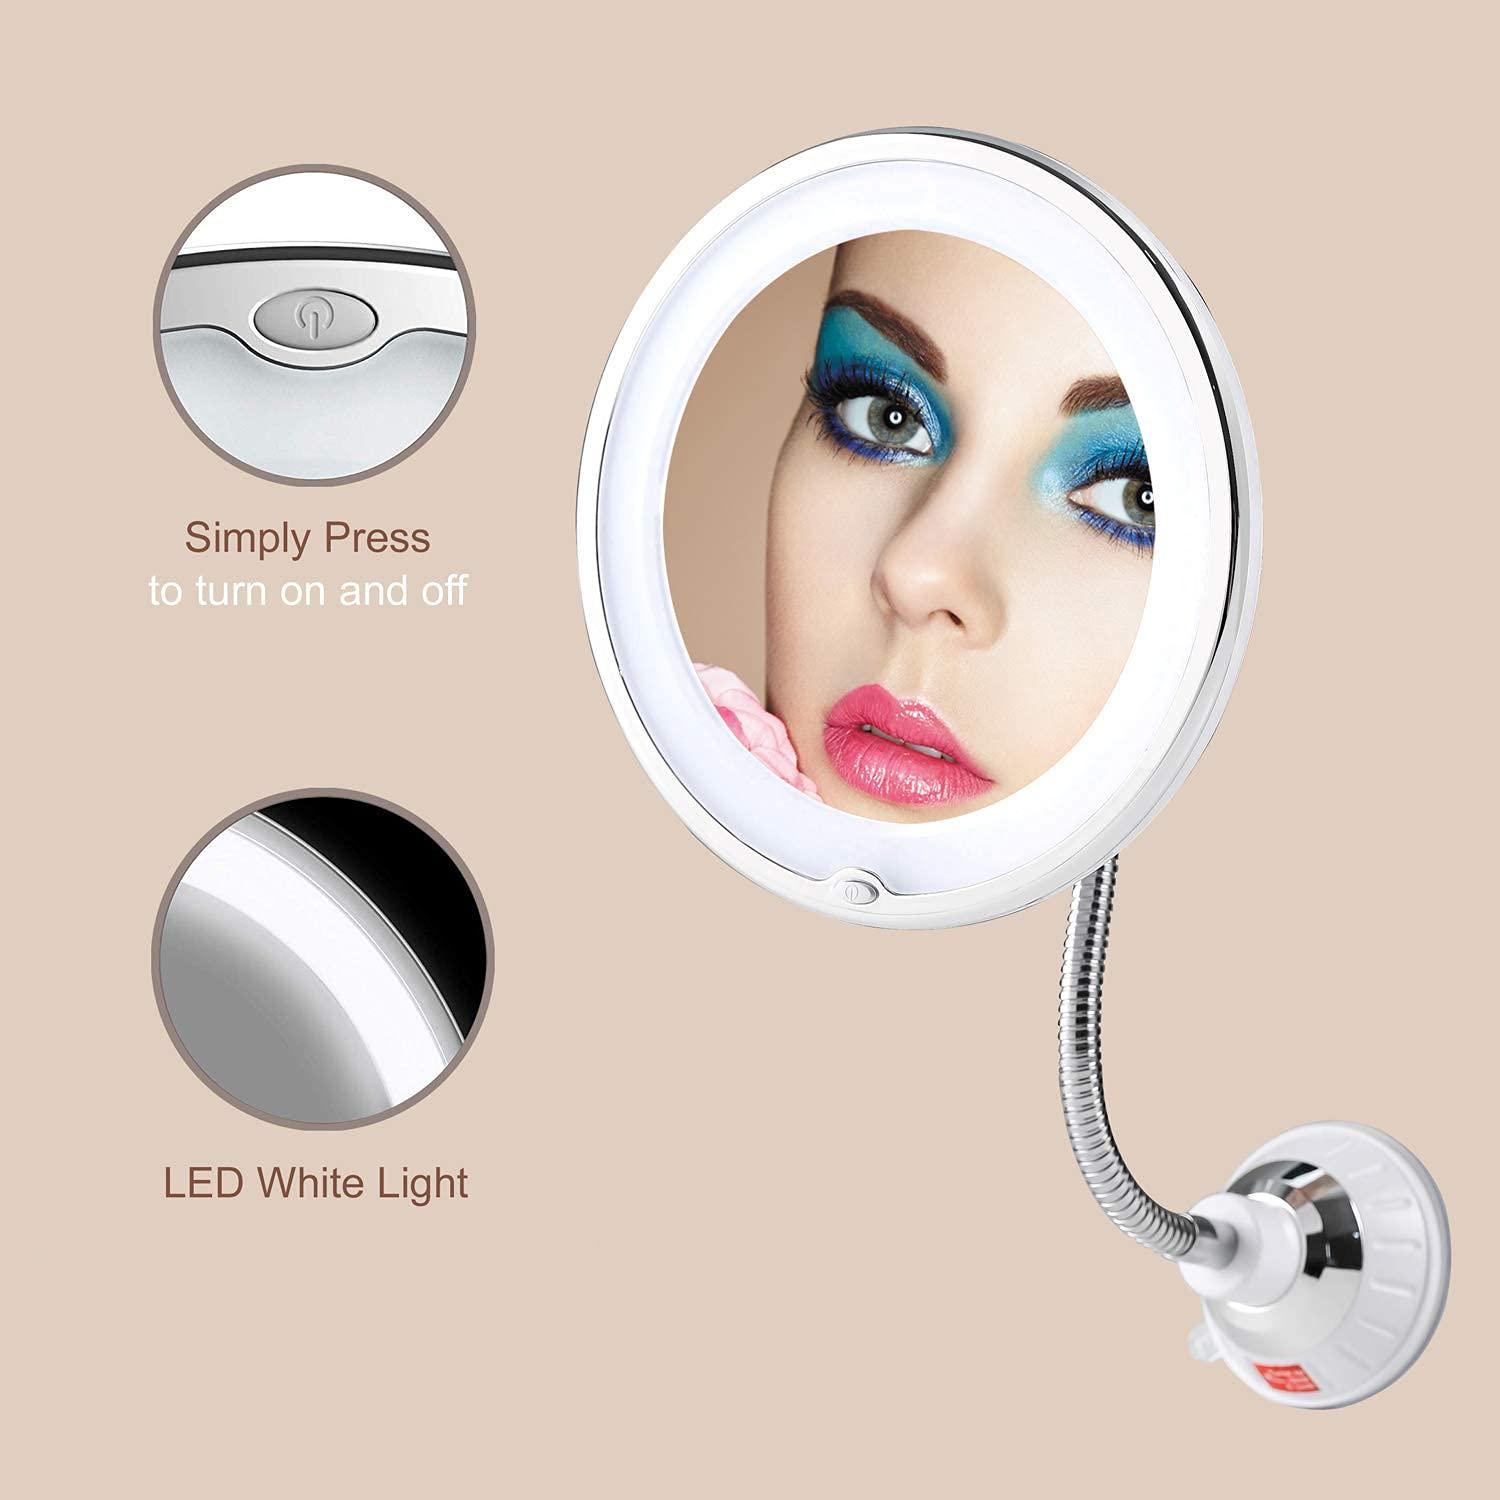 My Flexible Mirror Deluxe 10x Magnification 8” Make Up Round Vanity Mirror for Home, Bathroom Use with Super Strong Suction Cups As Seen on TV